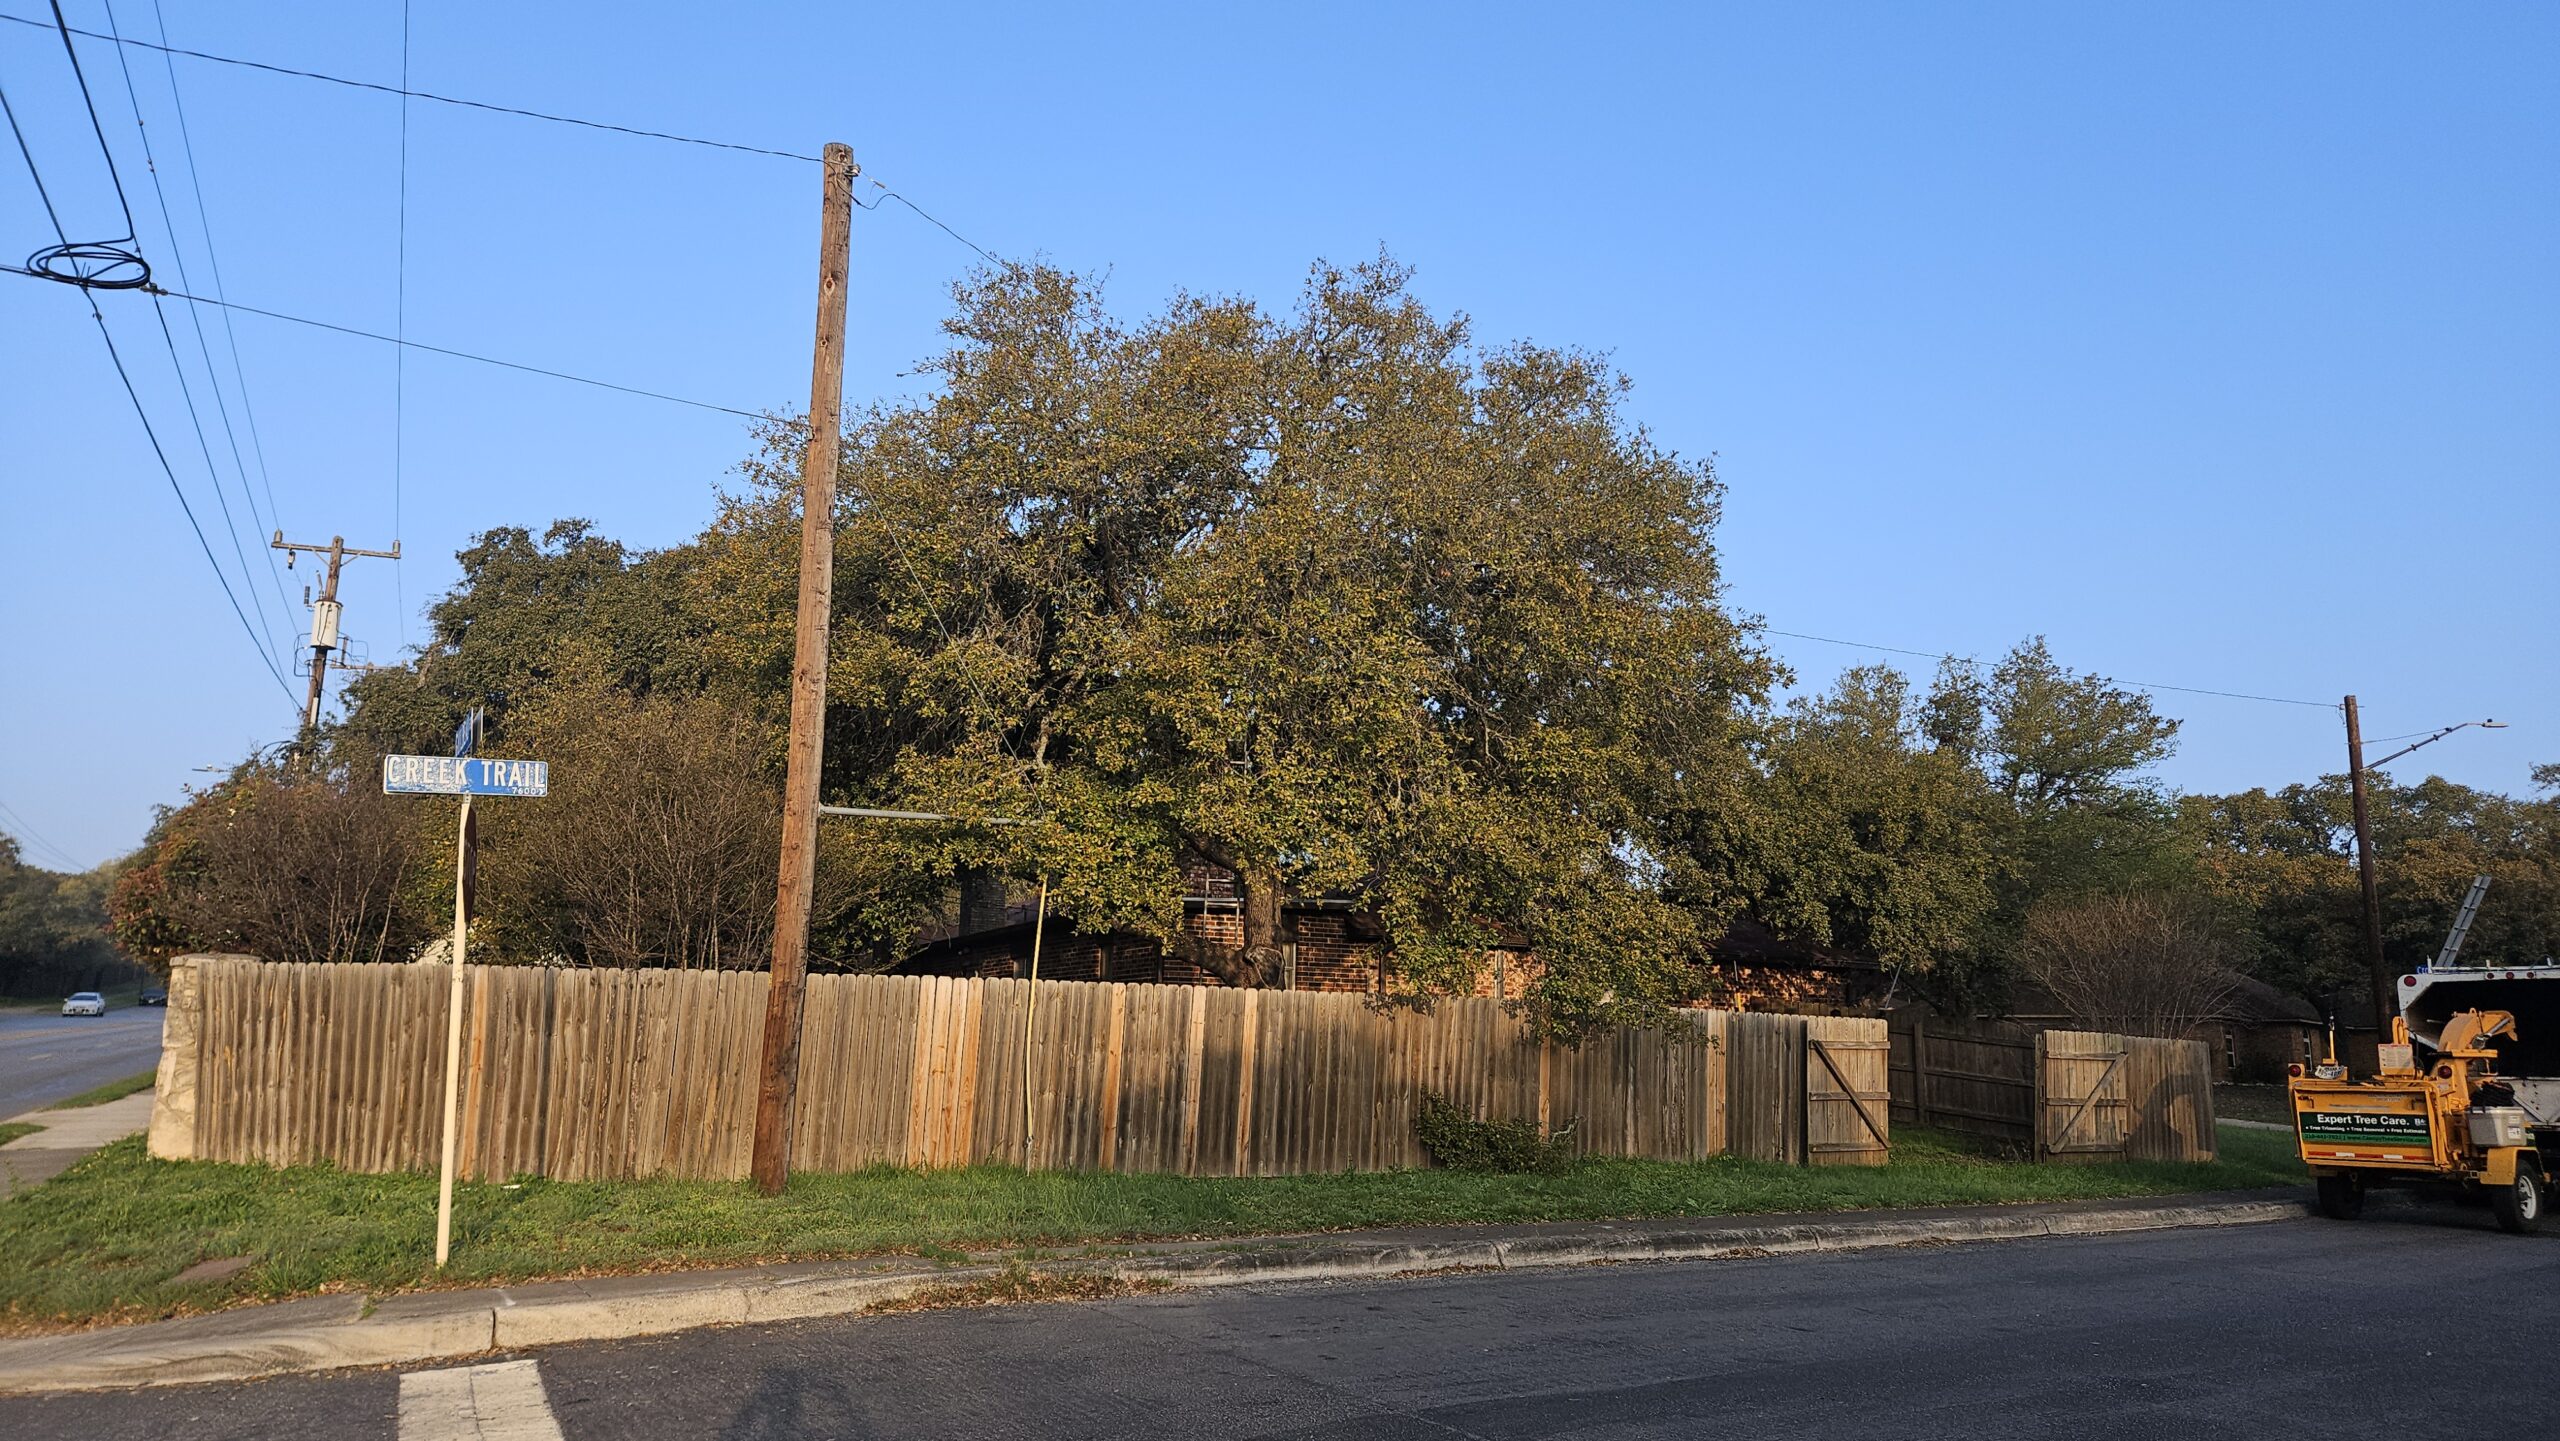 Multiple, mature Live Oak trees inside a suburban backyard residence overhang fence and interfere with pedestrian sidewalk. Canopy Tree Service wood chipper in picture.